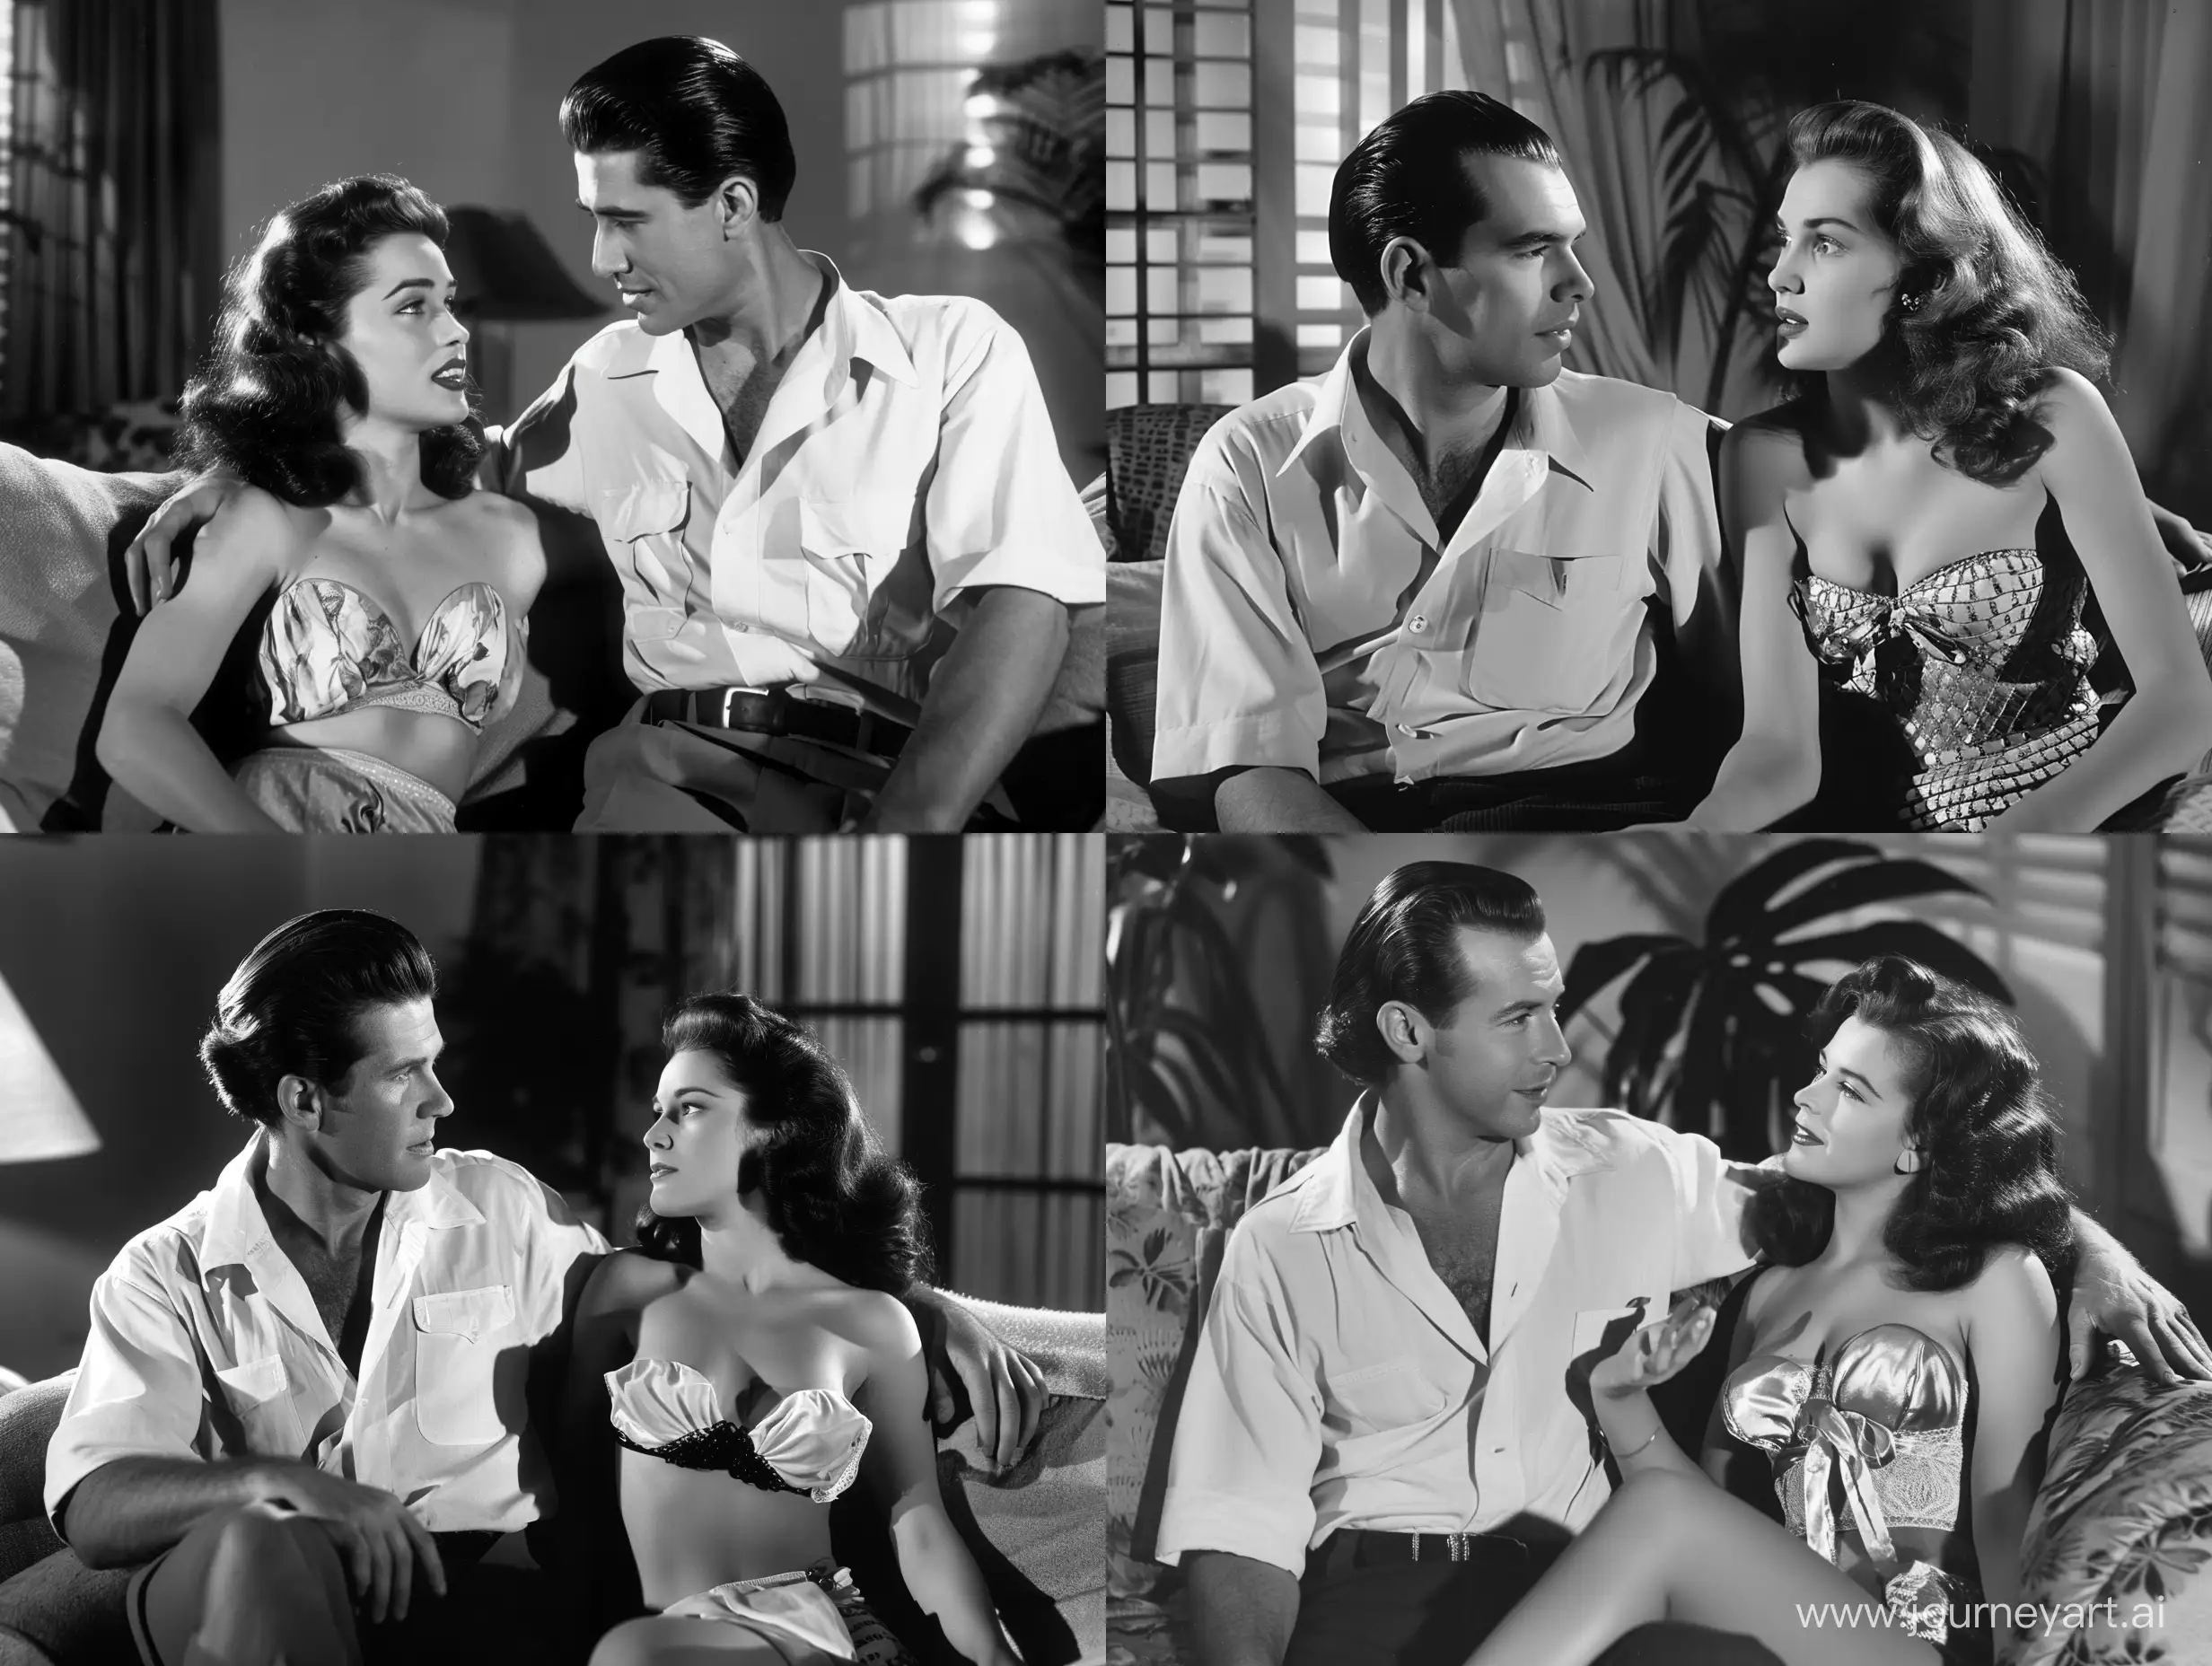 Film noir shot or a vintage 1940s movie star man with handsome face wearing a white shirt, talking with with a pretty 1940s female fatale woman wearing vintage 1940s lingerie, both sitting on a couch, cozy 1940s Buenos Aires apartmemt interior--ar 3:4